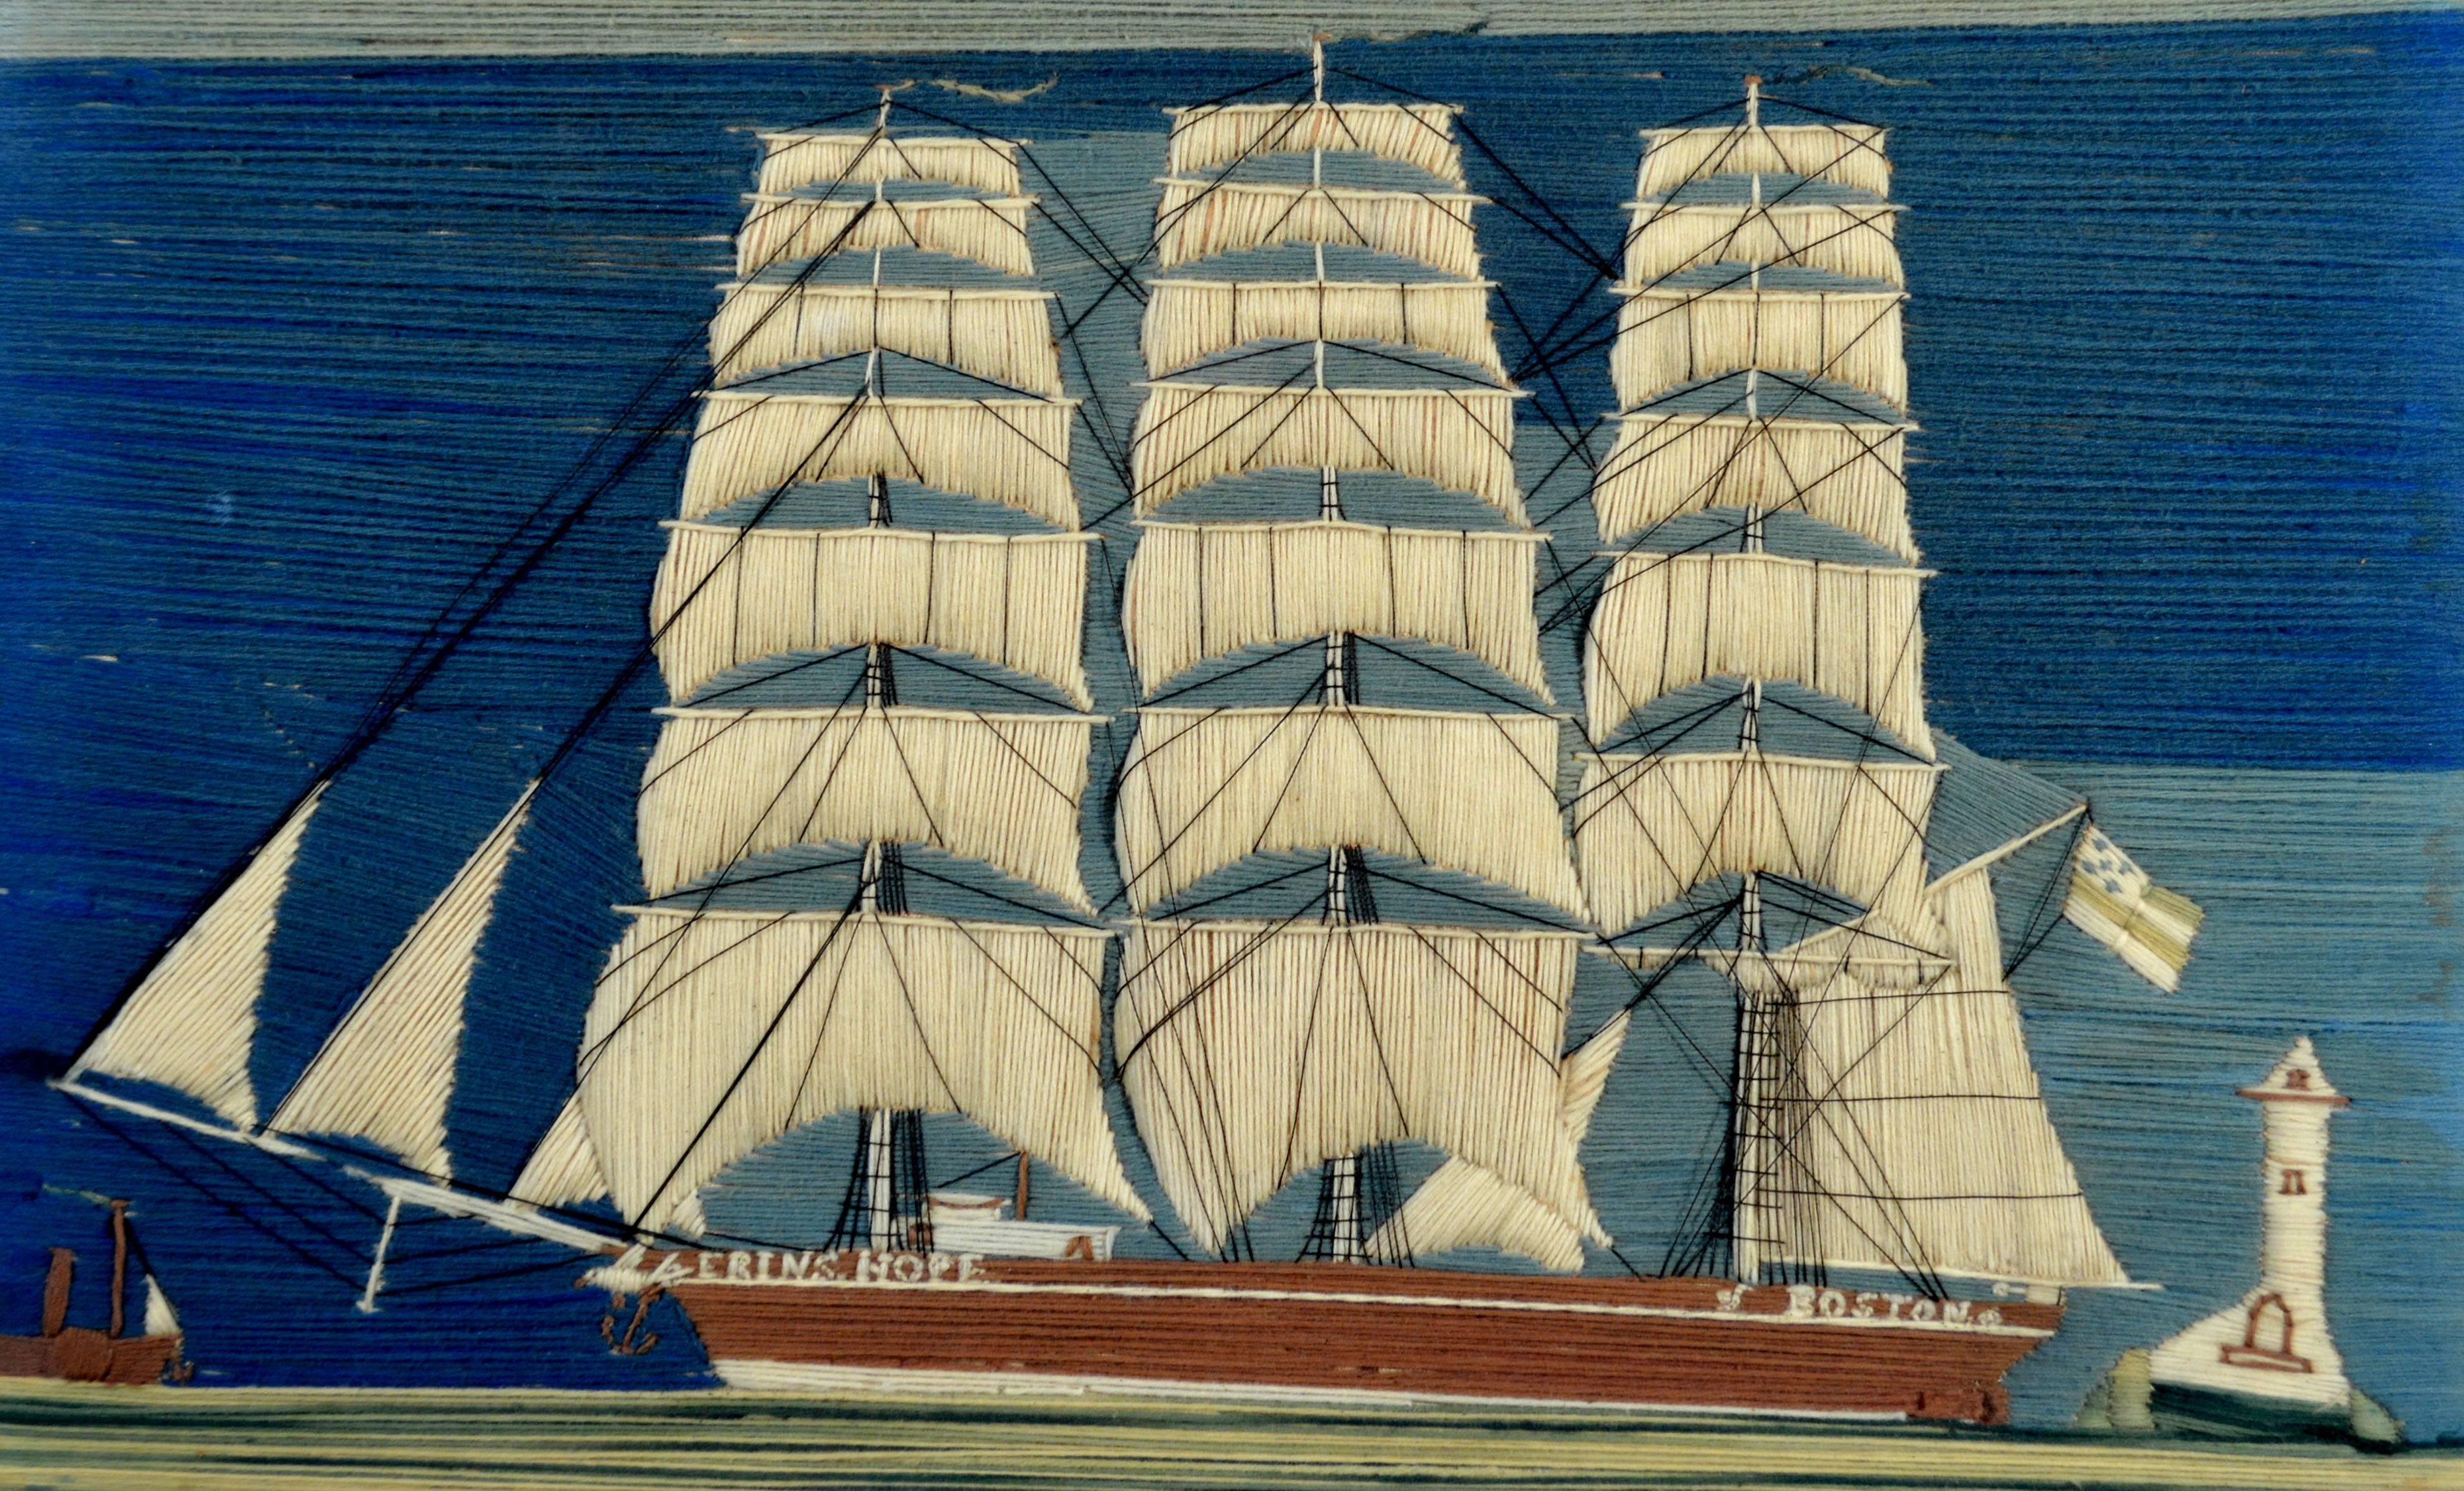 Folk Art Sailor's woolwork or woolie of a clipper ship,
named Erin's Hope Boston,
Possibly American, 
circa 1870s

The folky sailor's woolwork is named the Erins Hope and Boston is found on its stern. The wool depicts a clipper ship with seven